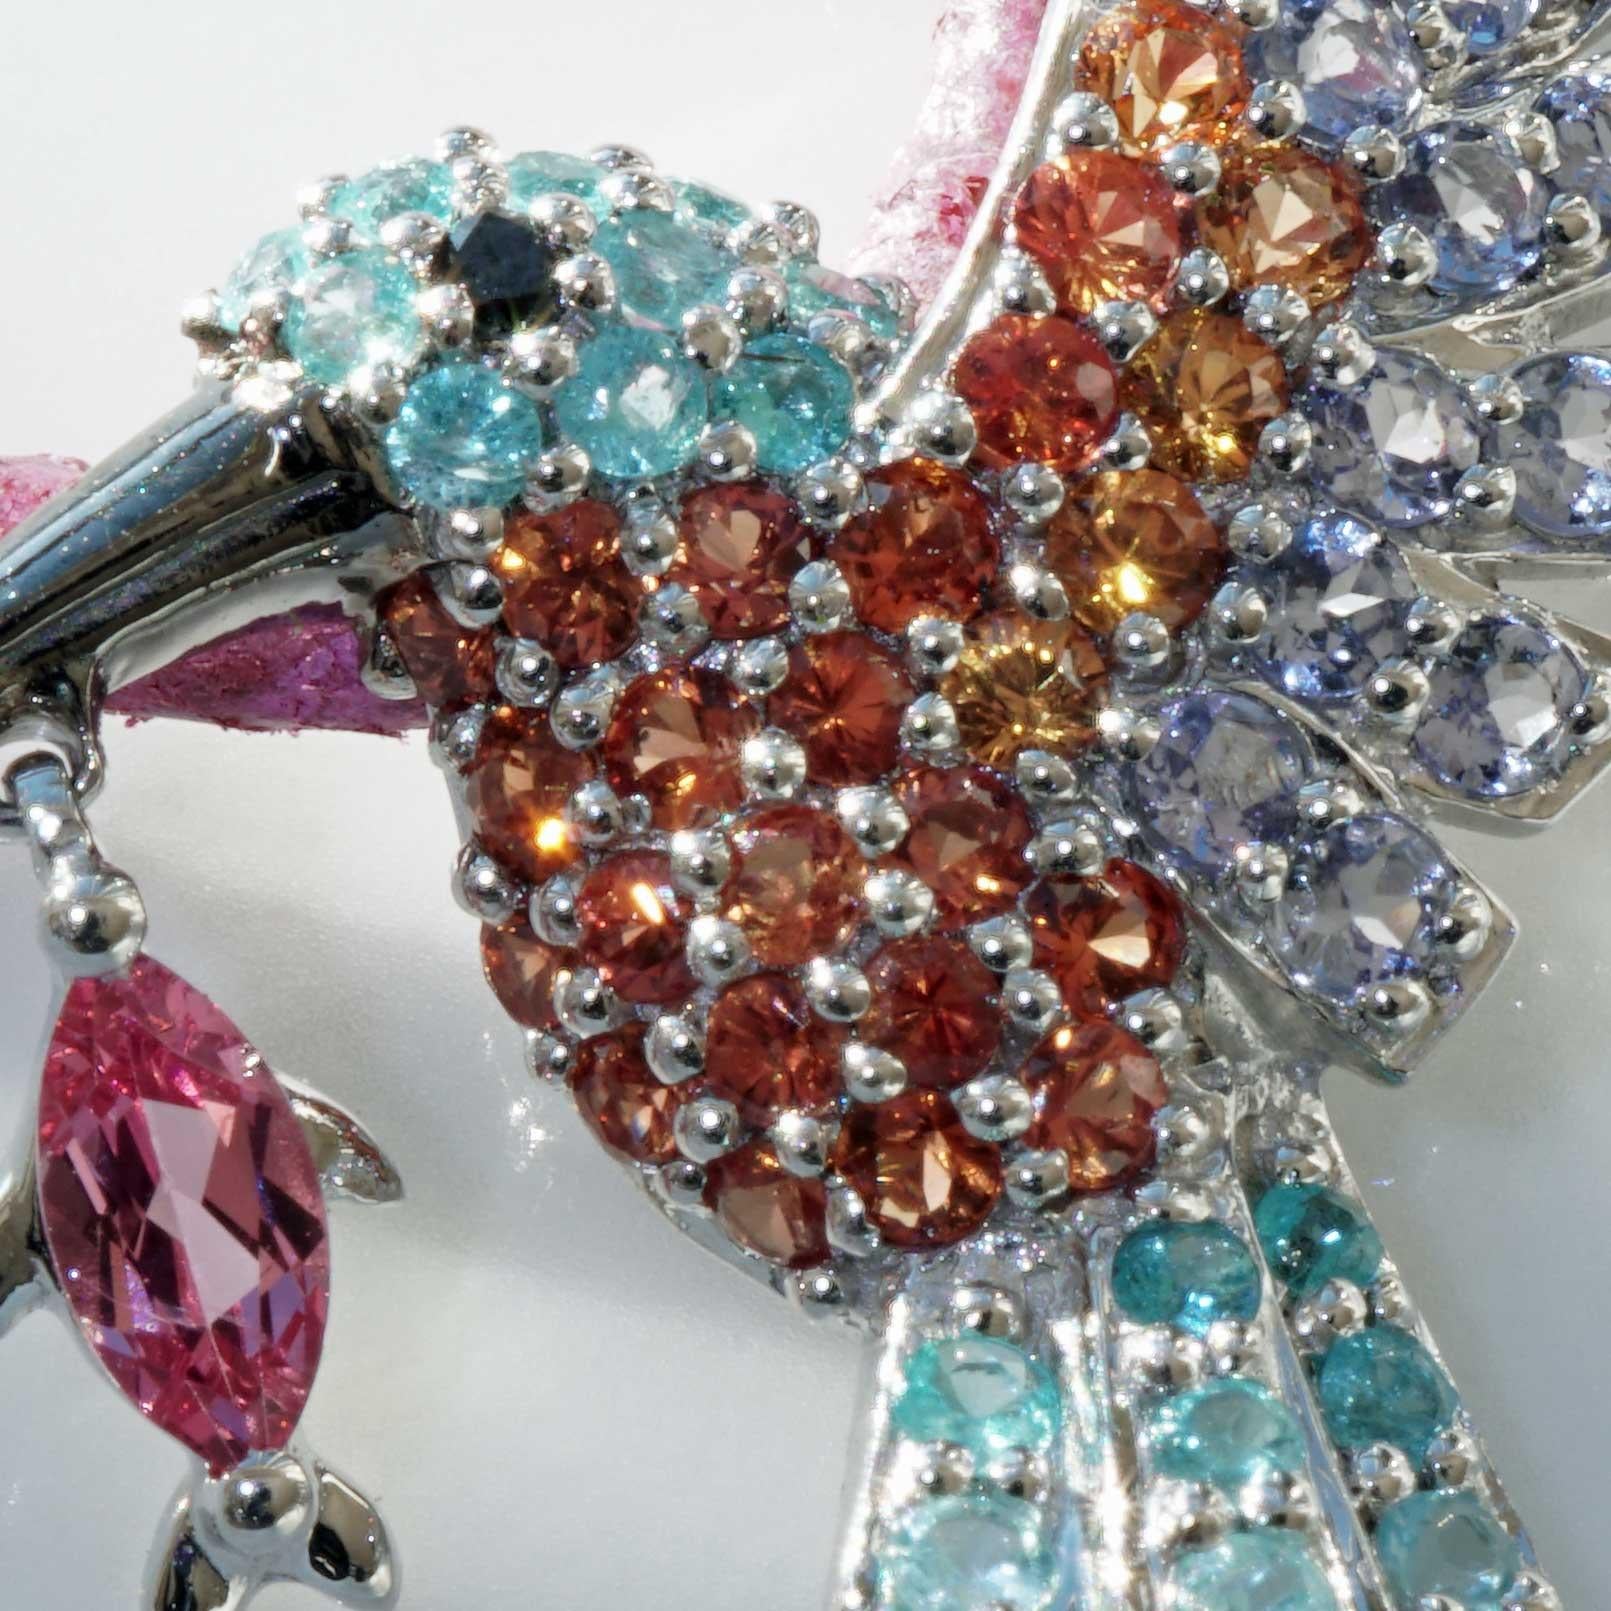 Kingfisher Bird Pendant Paraiba Tourmaline and Spinel most extravagant Colors  In New Condition For Sale In Viena, Viena